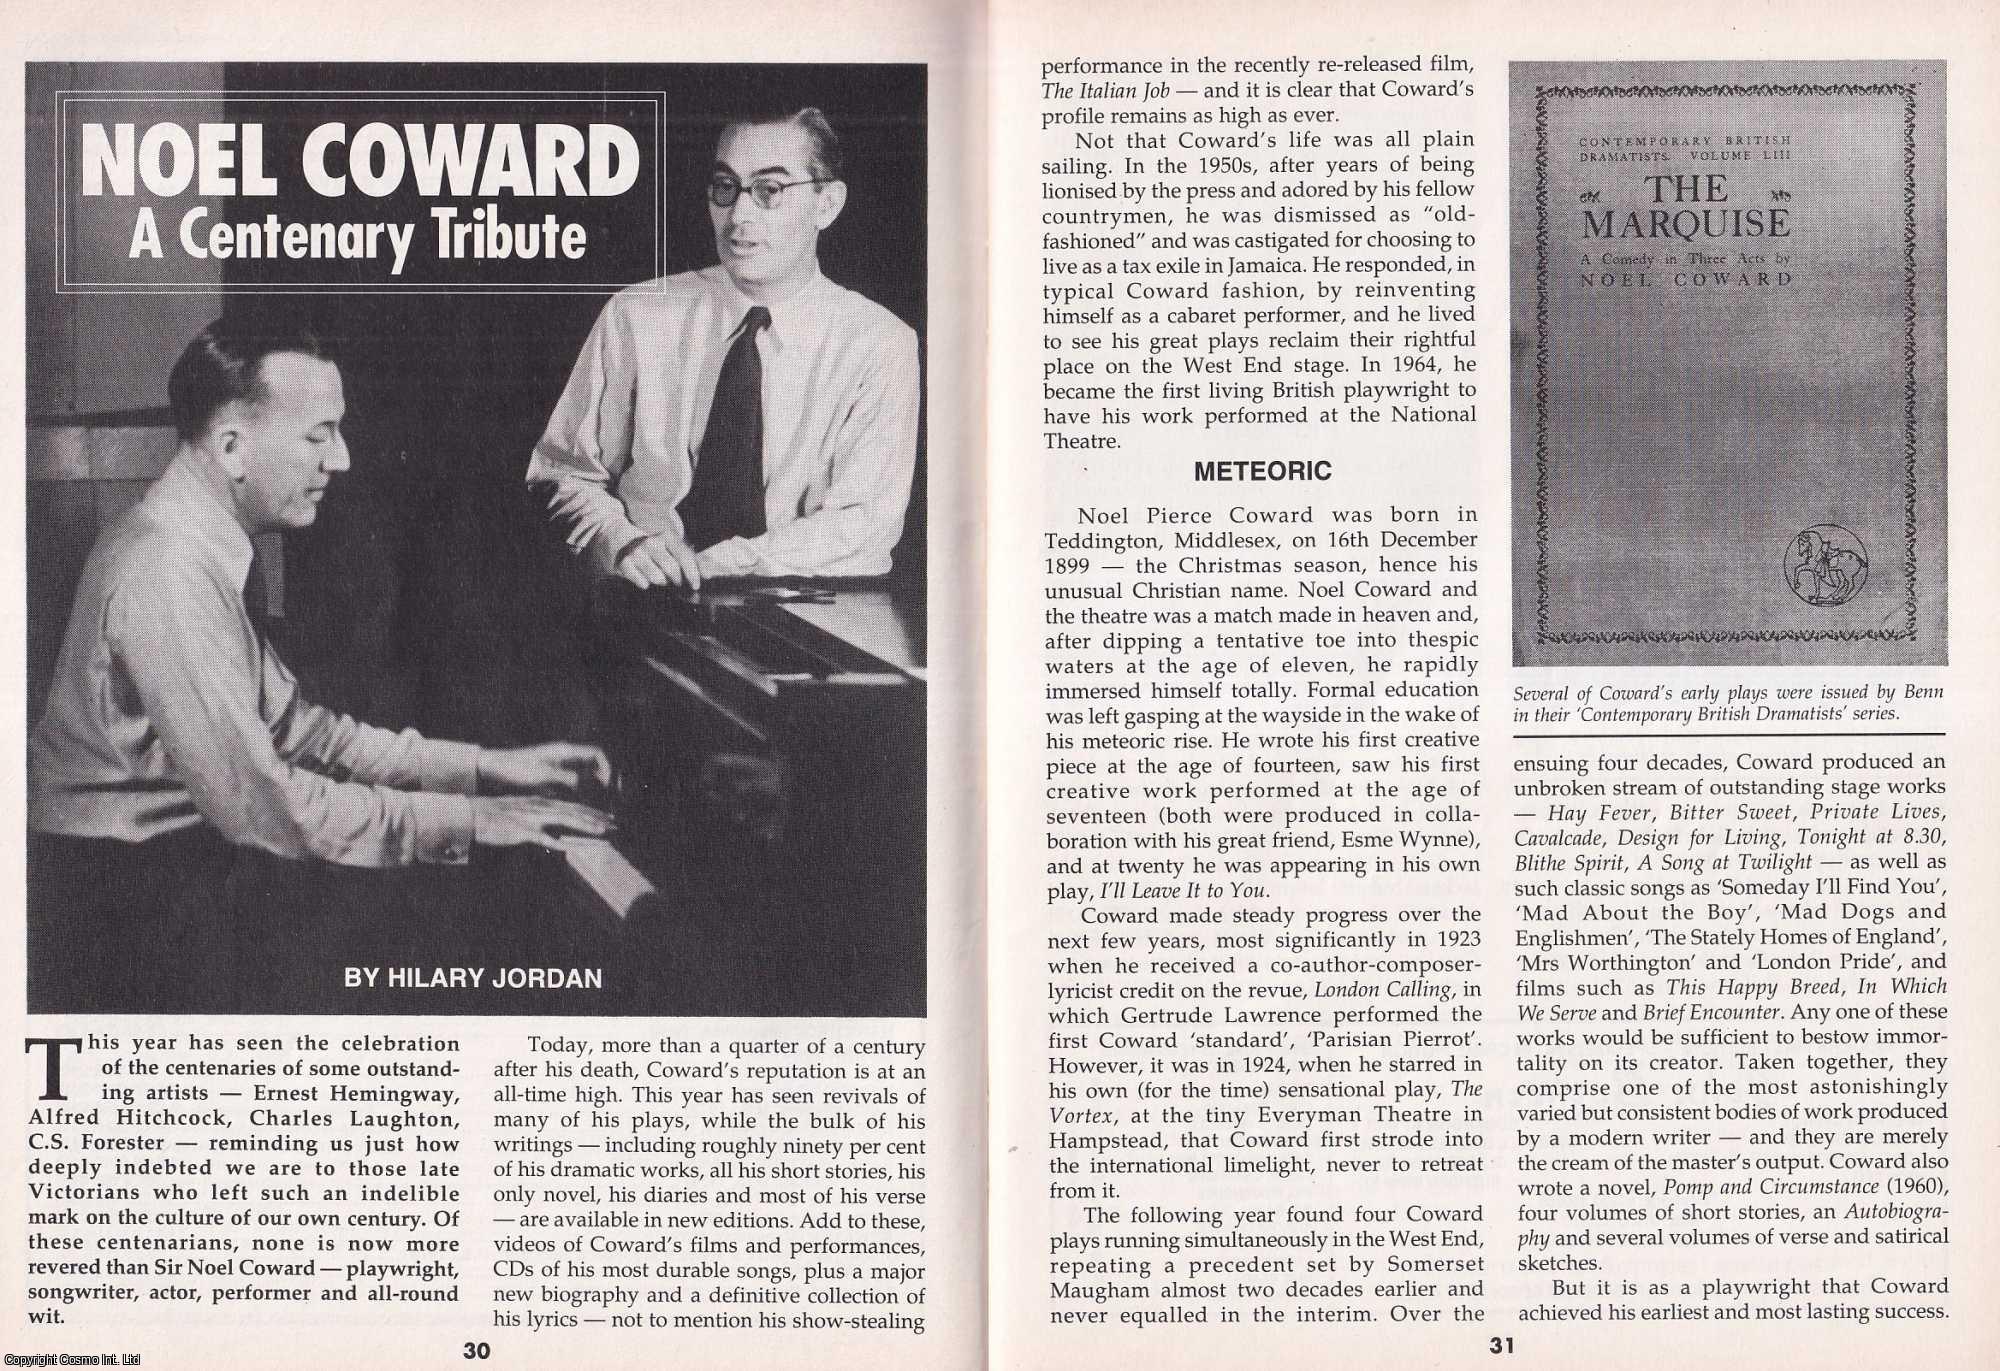 Hilary Jordan - Noel Coward. A Centenary Tribute. This is an original article separated from an issue of The Book & Magazine Collector publication.